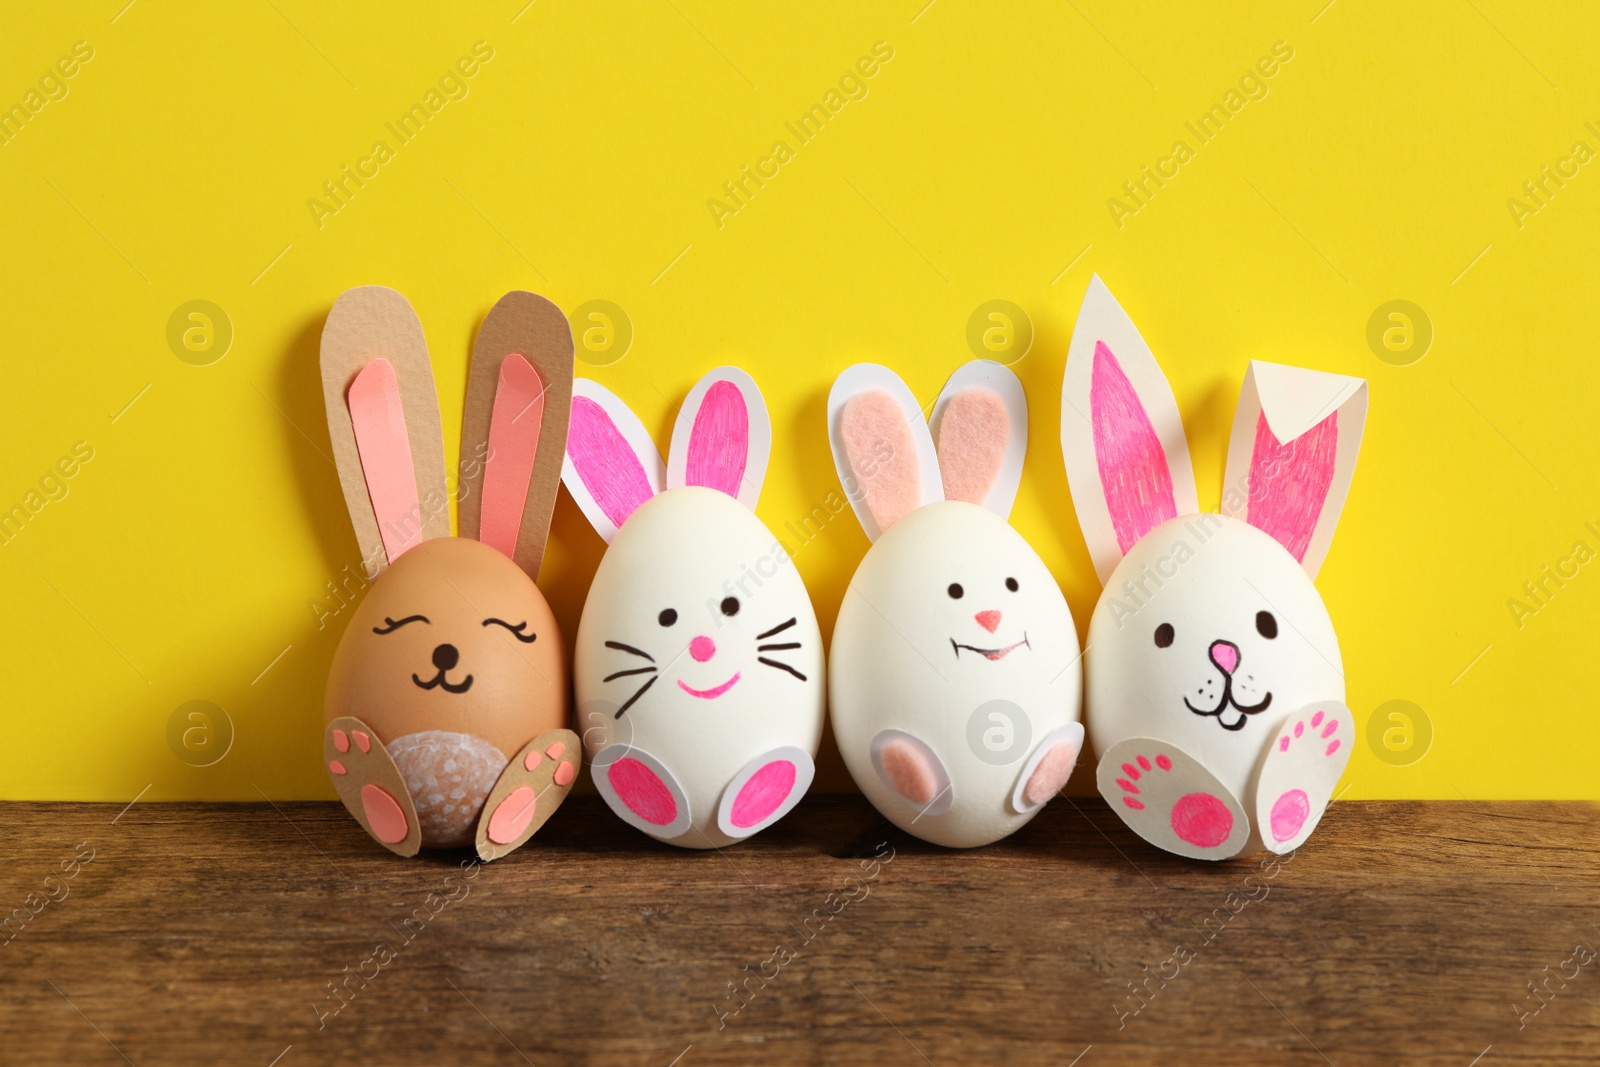 Photo of Eggs as cute bunnies on wooden table against yellow background. Easter celebration